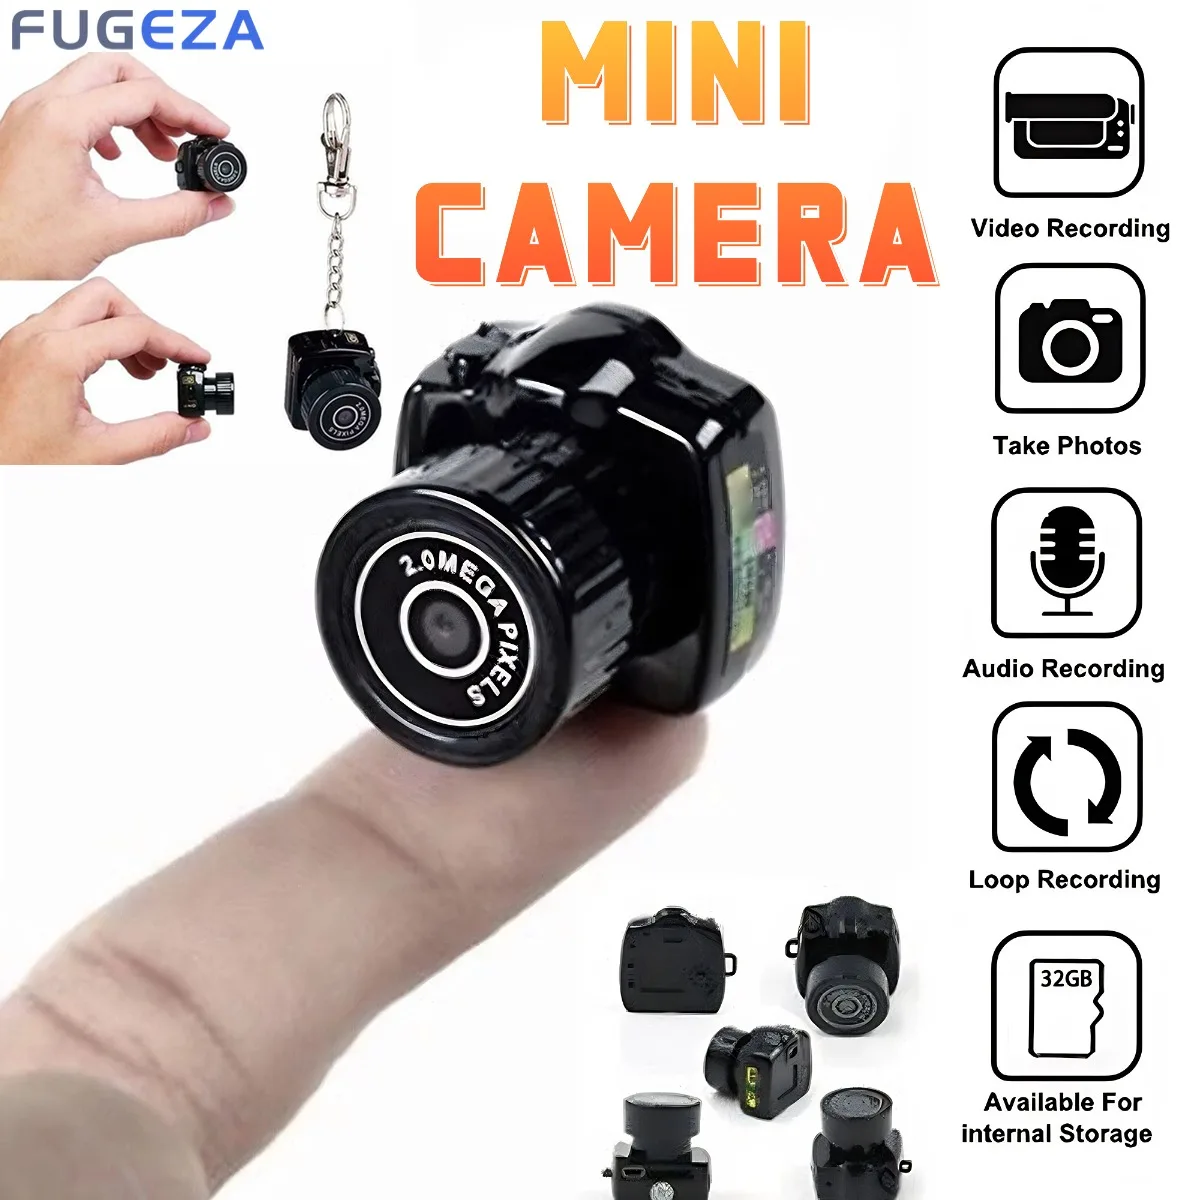 

FUGEZA Mini Camera HD Video Audio Recorder Webcam Voice Monitoring Camcorder Outdoor Sport DV Micro Cam with Mic Motorcycle DVR